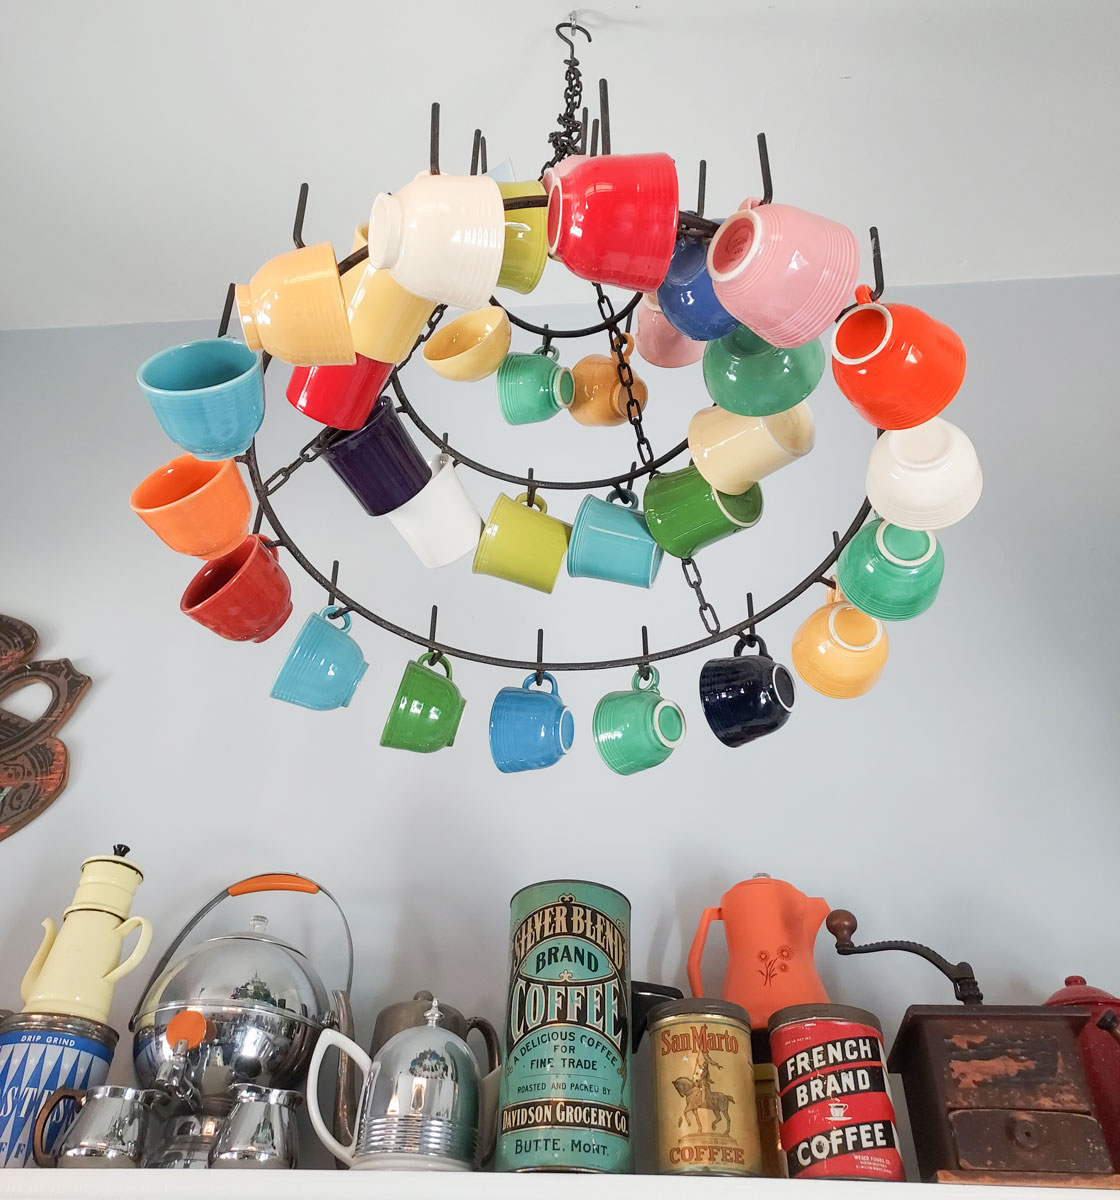 A chandelier of colorful coffee cups hangs near vintage coffee cans and equipment at Moonlight Coffee & Tea in Encinitas.  Photo by Ryan Woldt